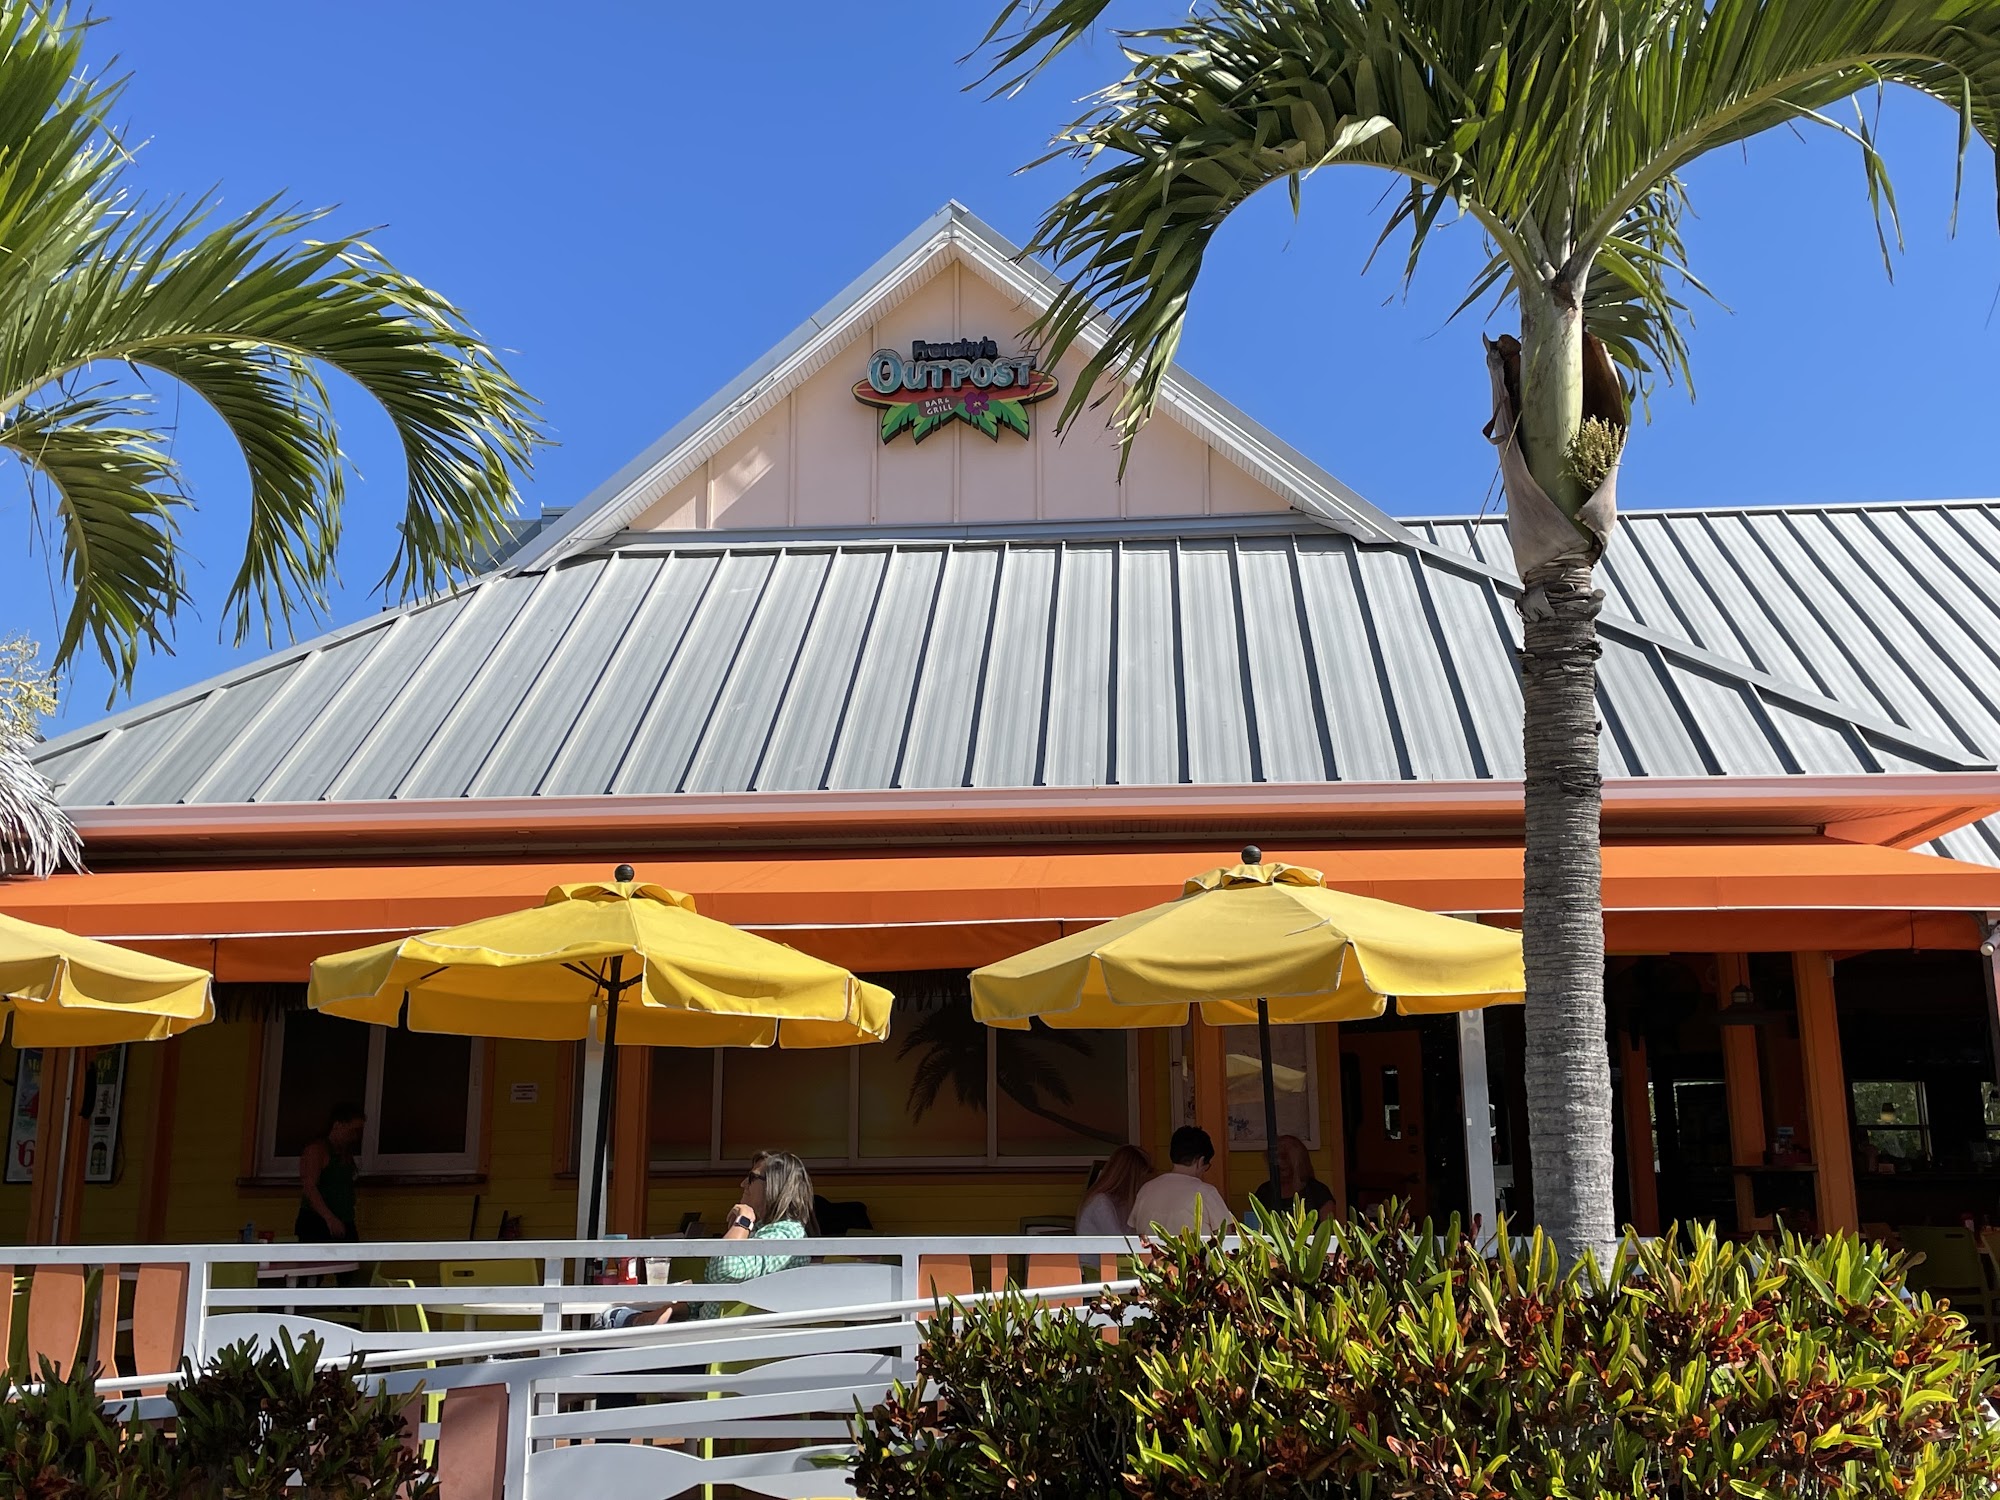 Frenchy's Outpost Bar and Grill